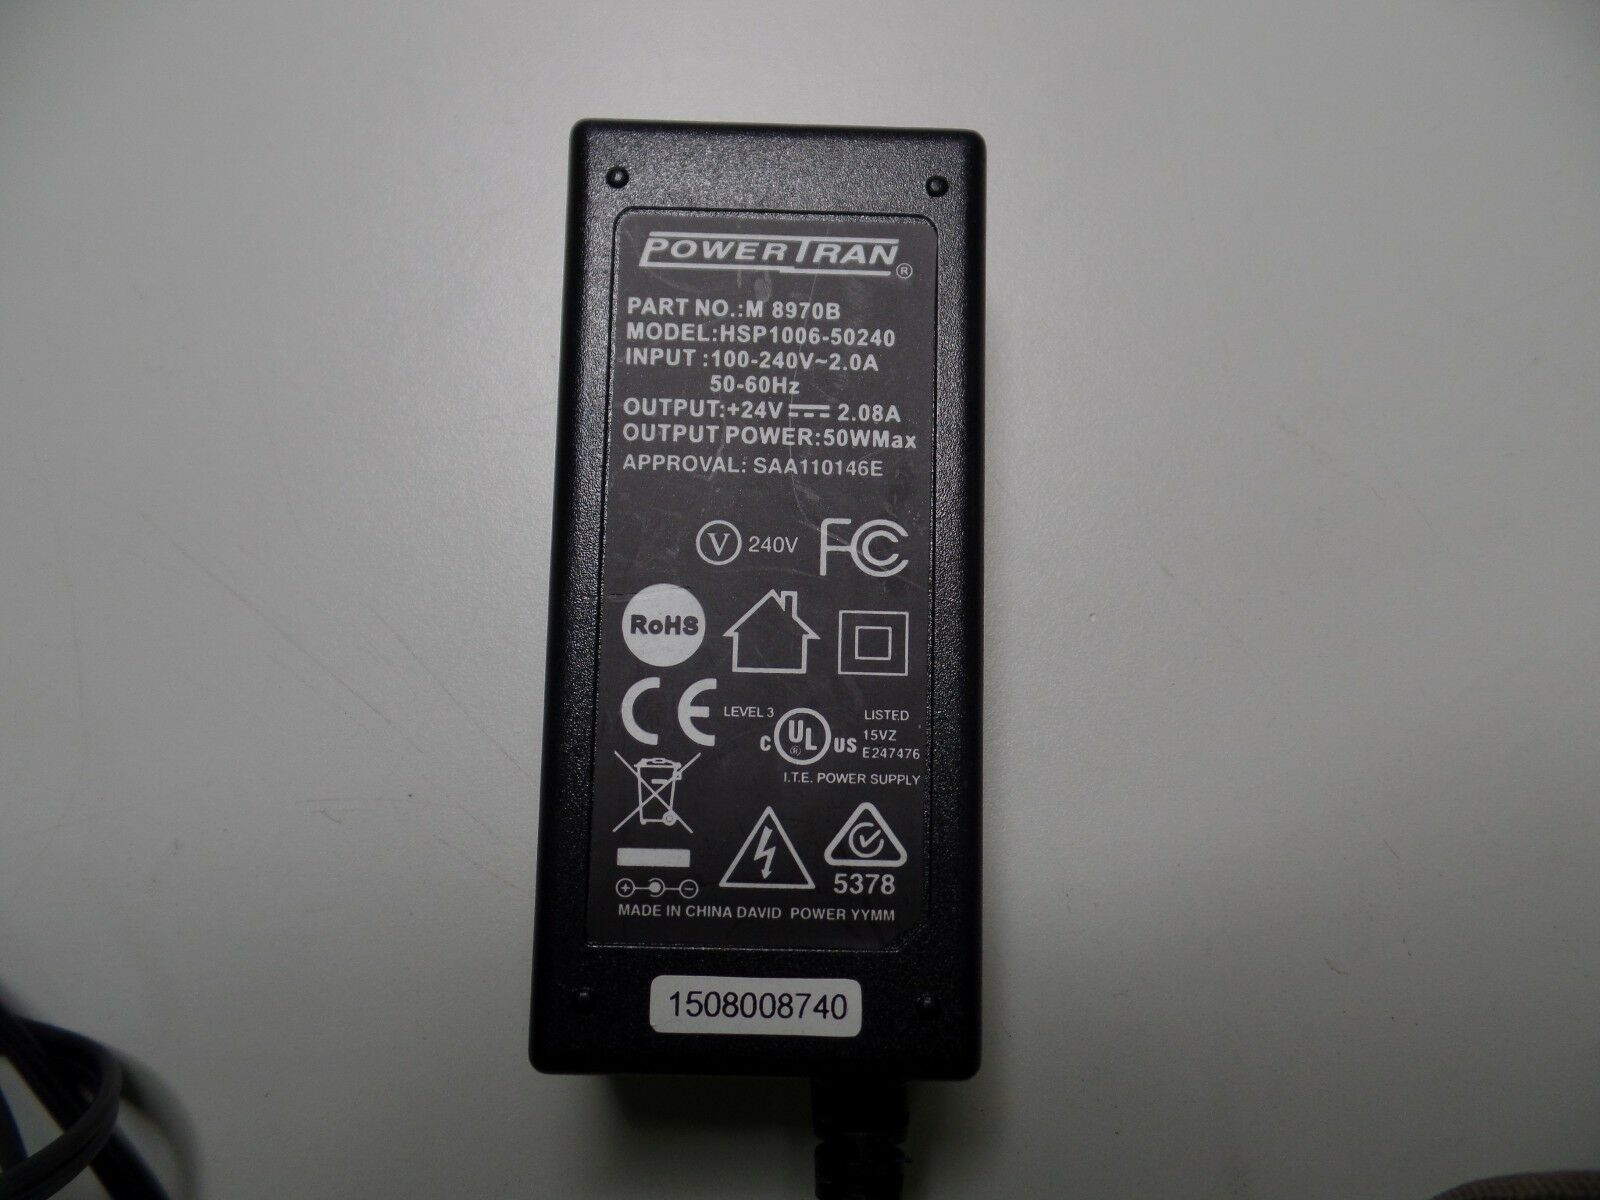 Powertran M 8970B HSP1006-50240 24V 2.08A AC Adapter 2.1mm DCJack for Appliances Specification: Ma